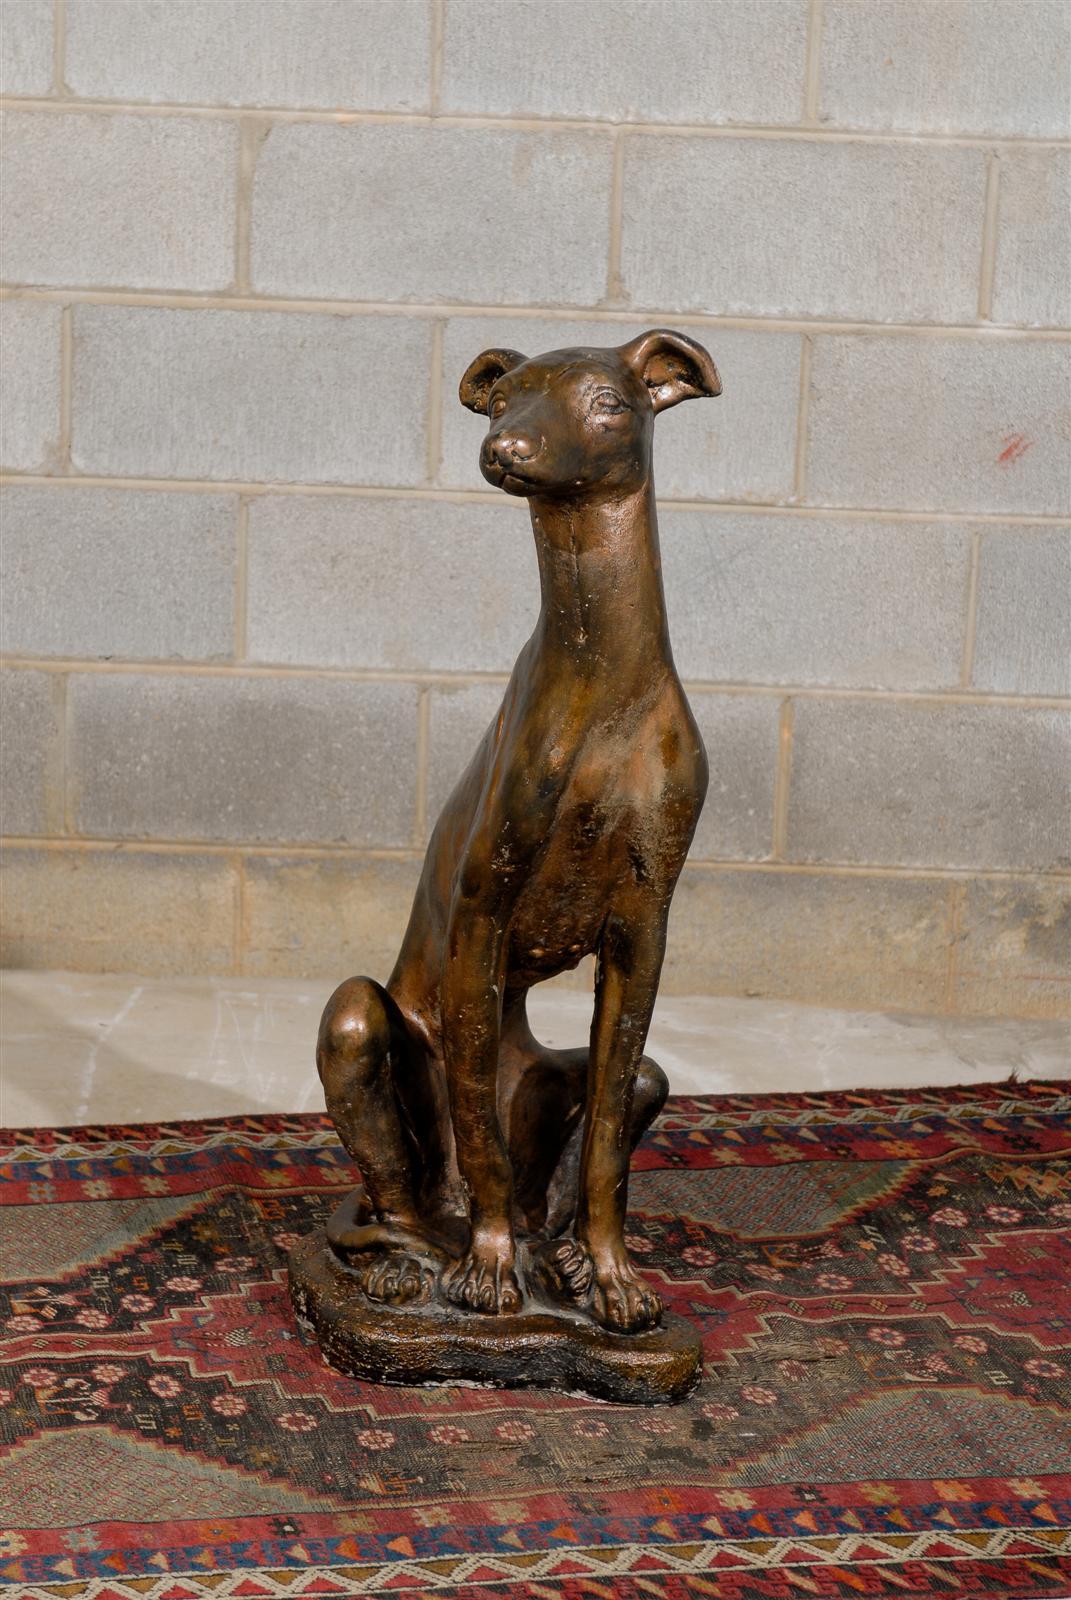 20th century Italian greyhound or whippet statue in a bronze finish with wonderful patina.